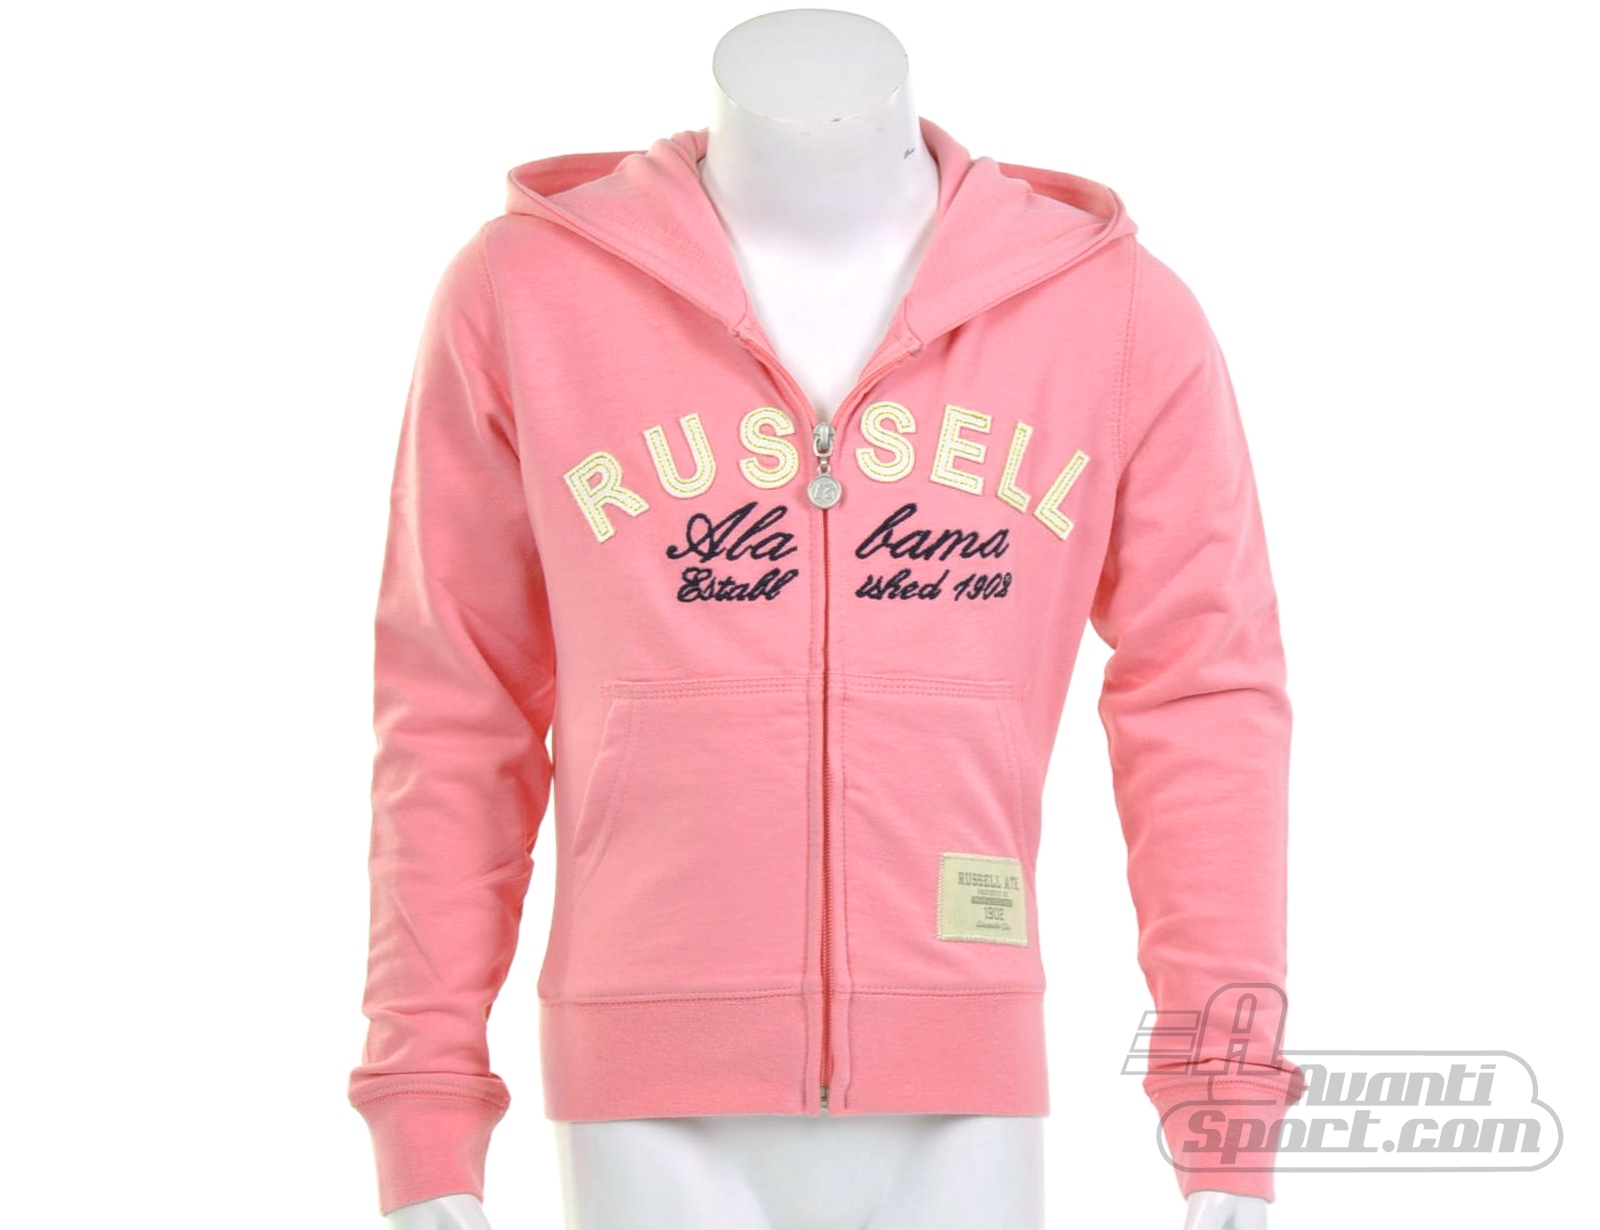 Avantisport - Russell Athletic  - Zip Though Hooded Sweat - Russel Athletic Jack